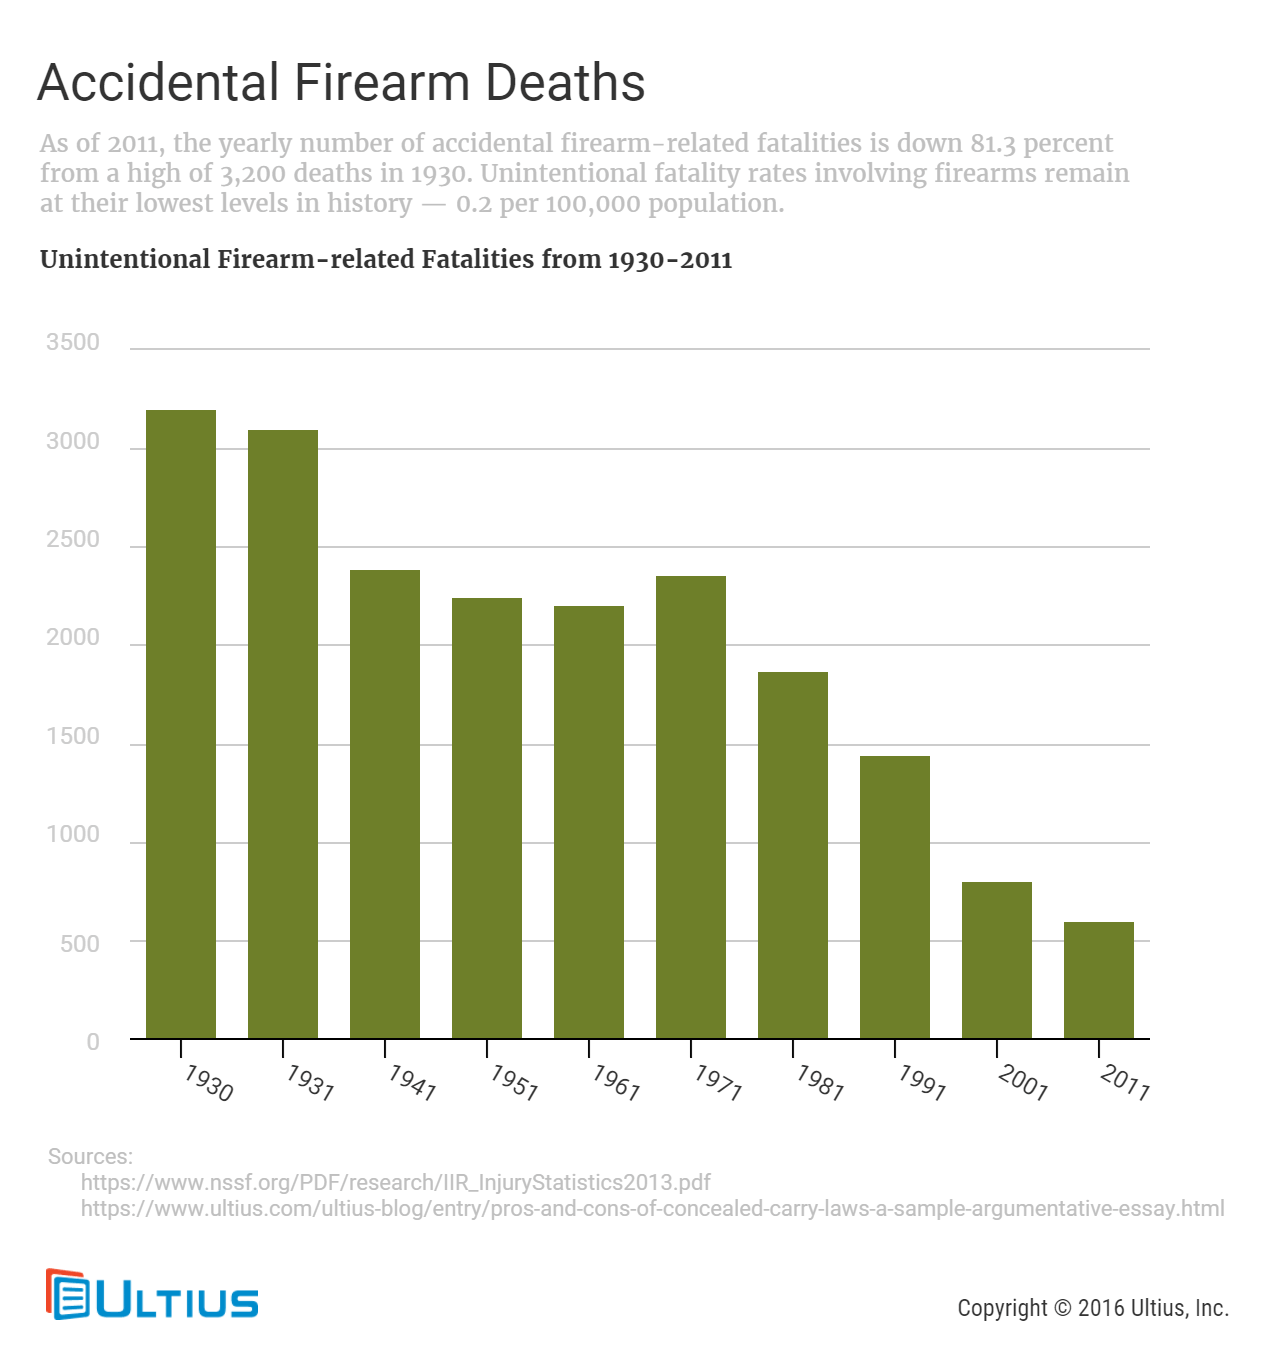 Accidental Firearm-Deaths from 1930 to 2011